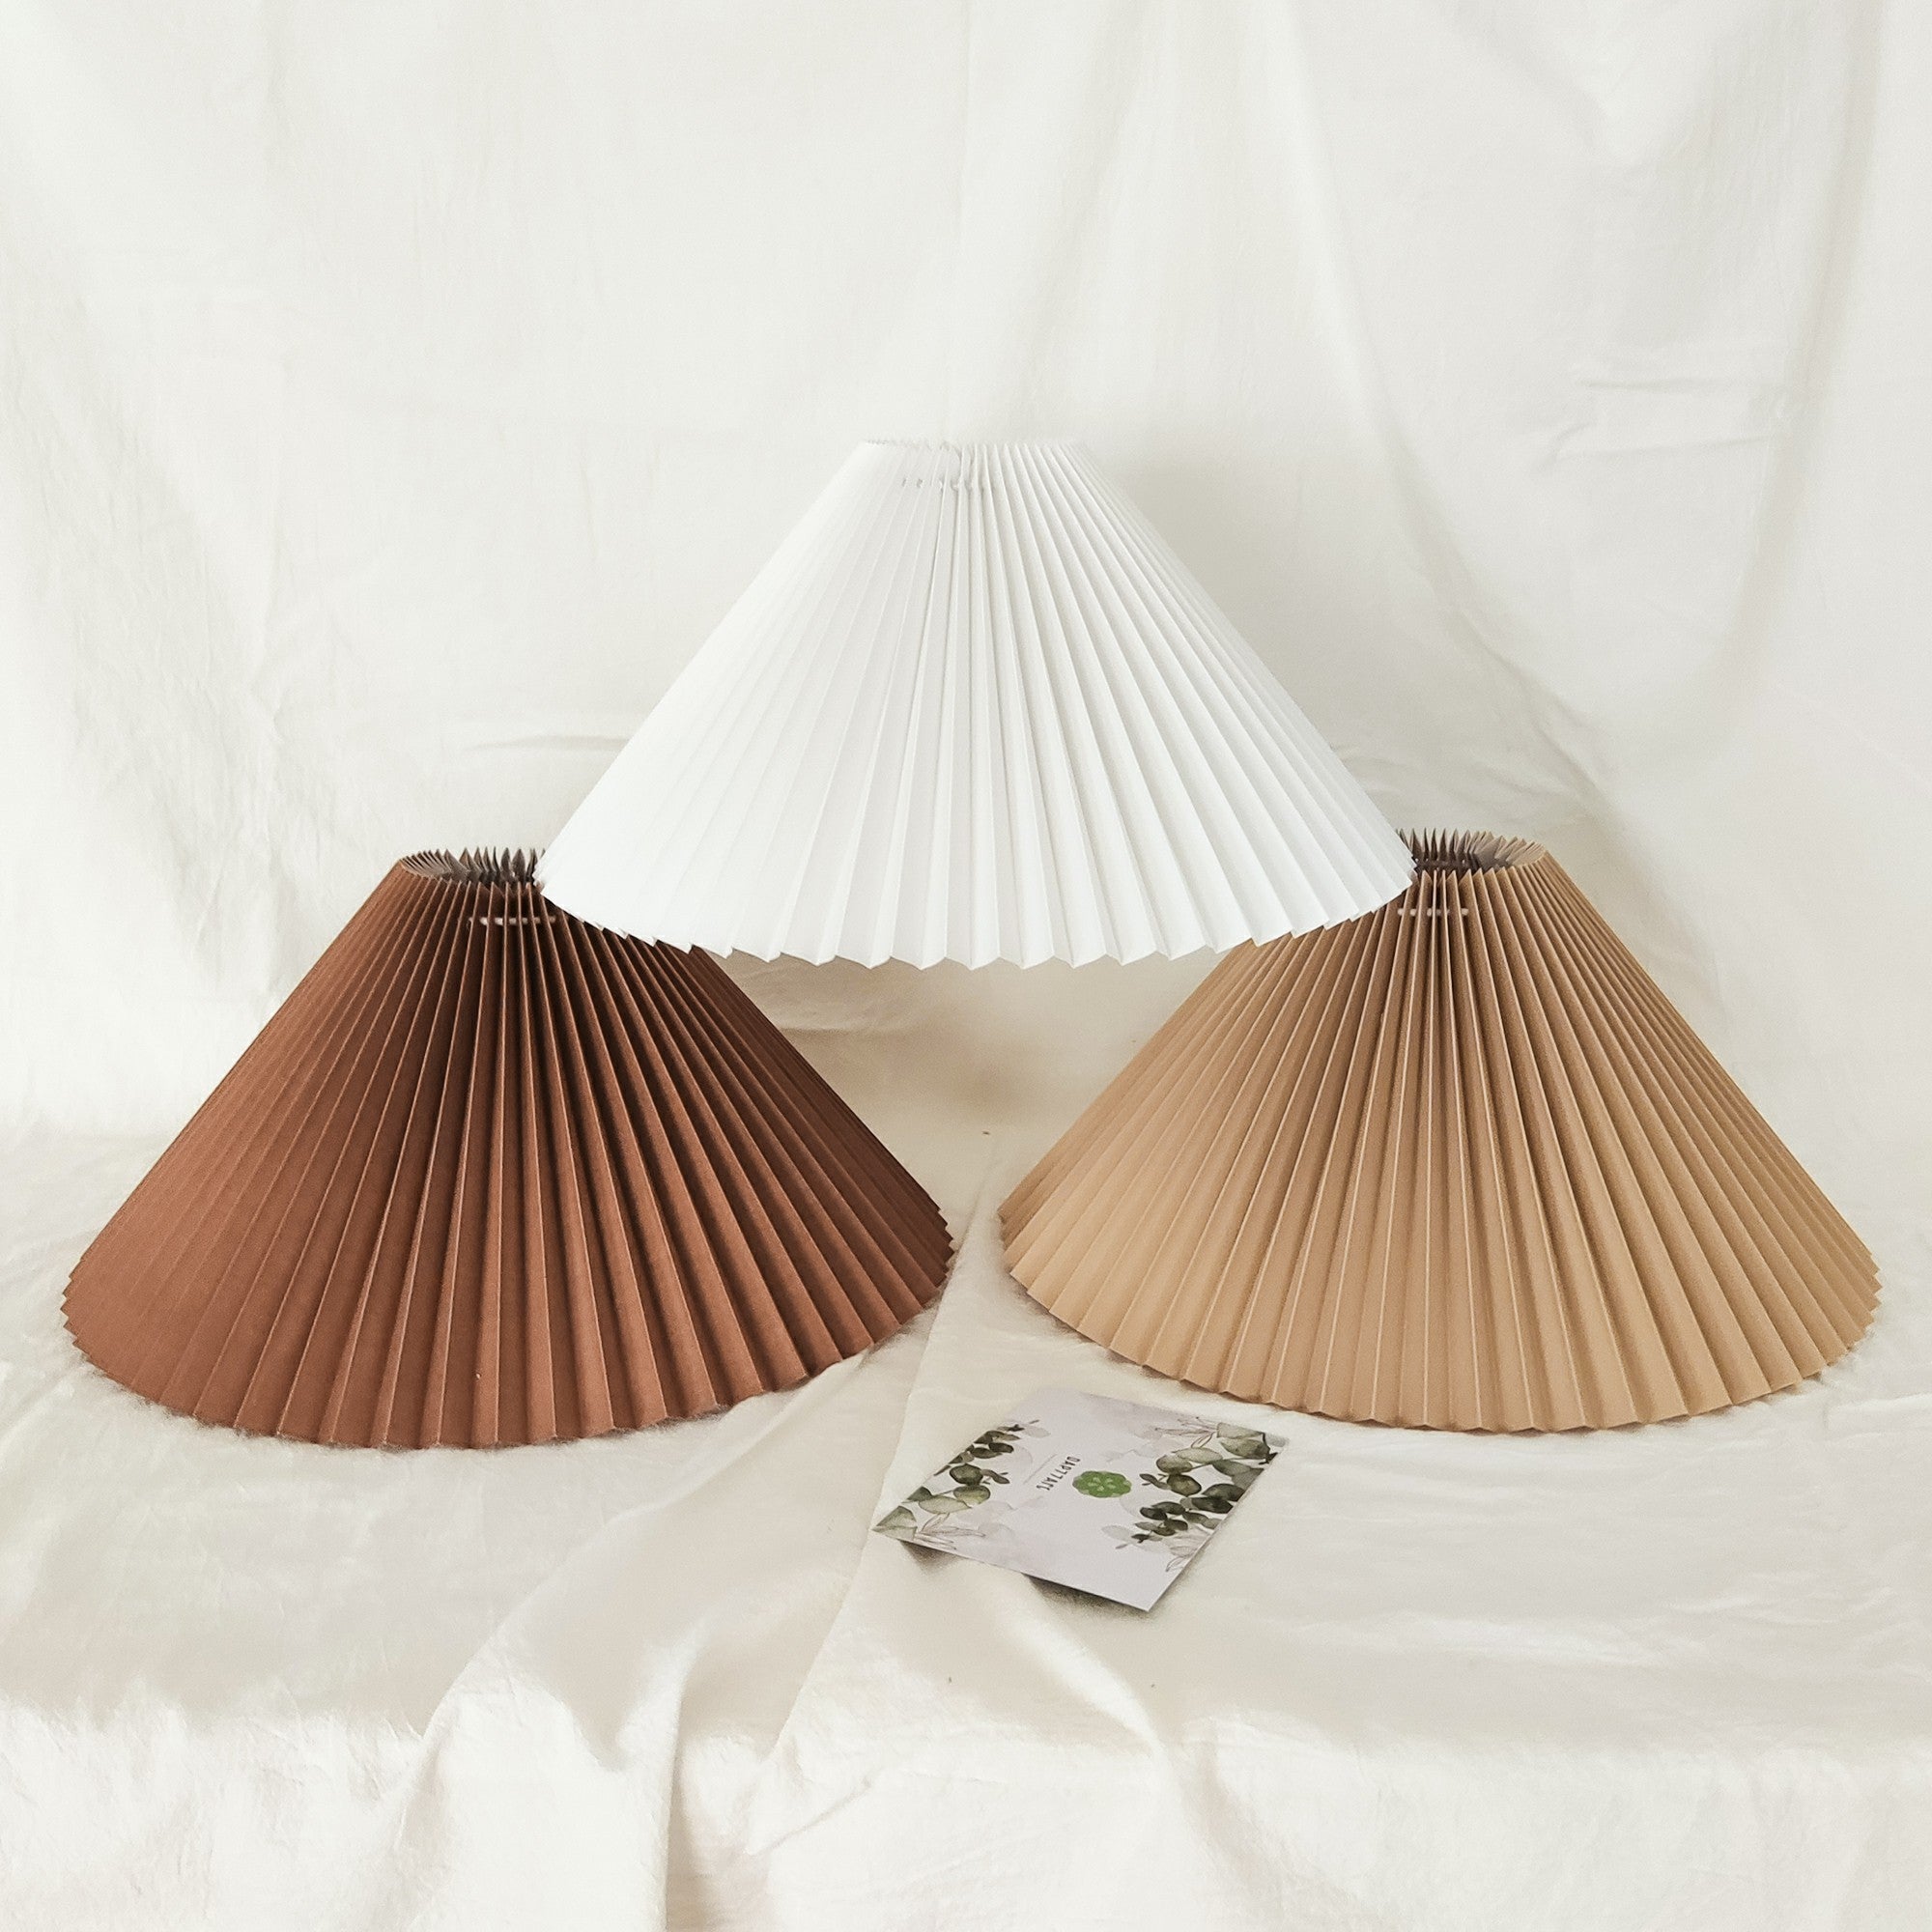 lampshades for hanging